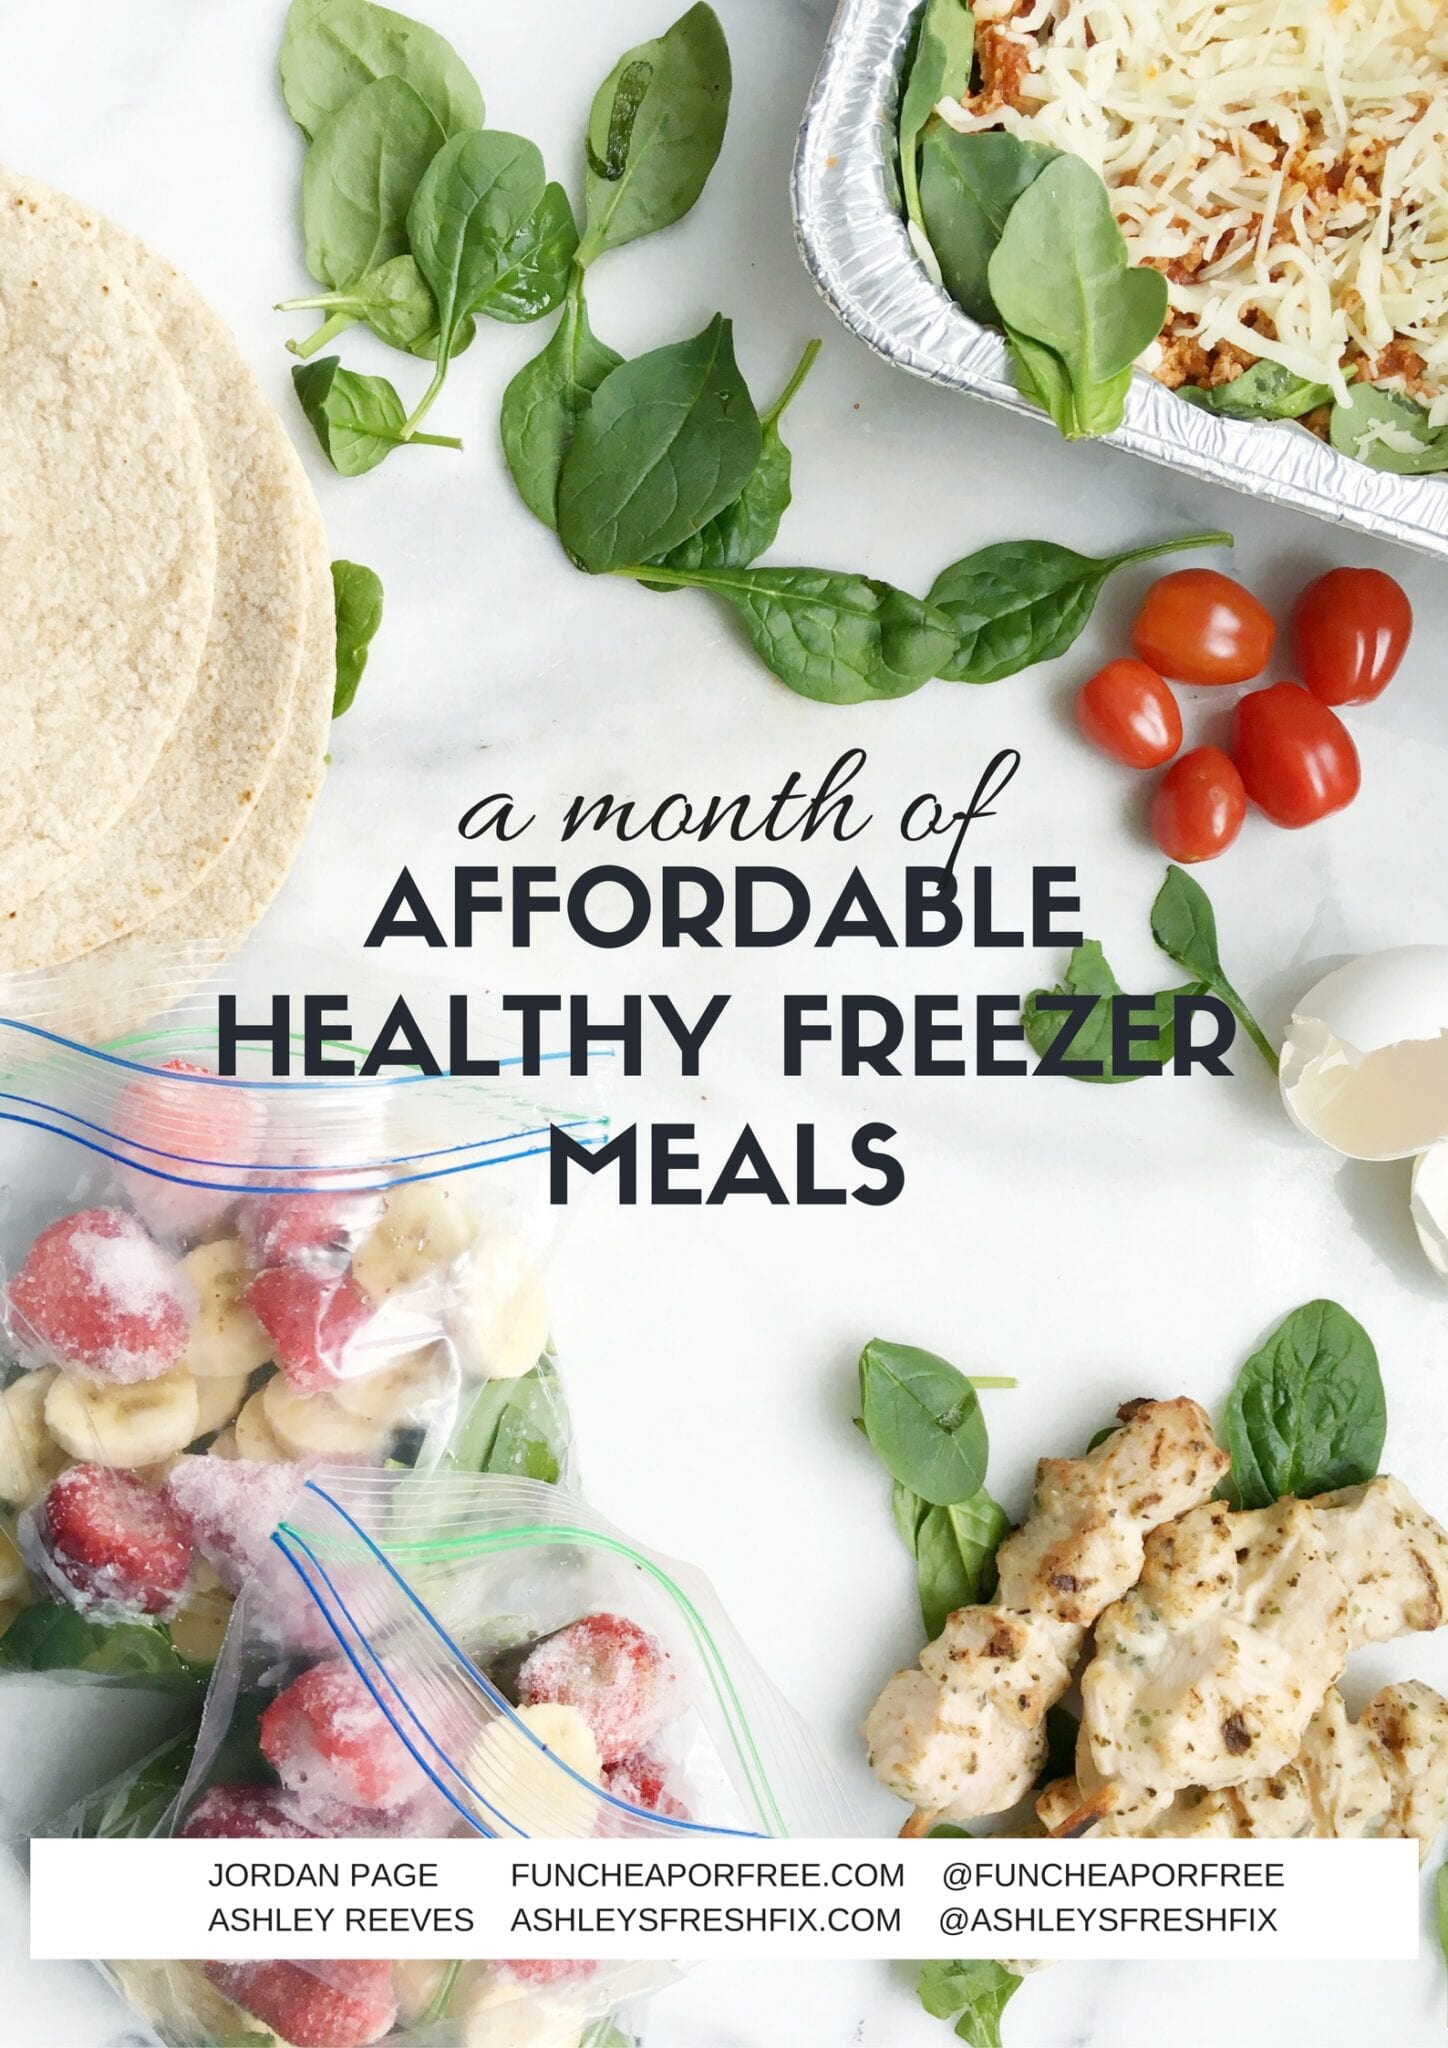 FREE Ebook: A Month of Affordable Healthy Freezer Meals!